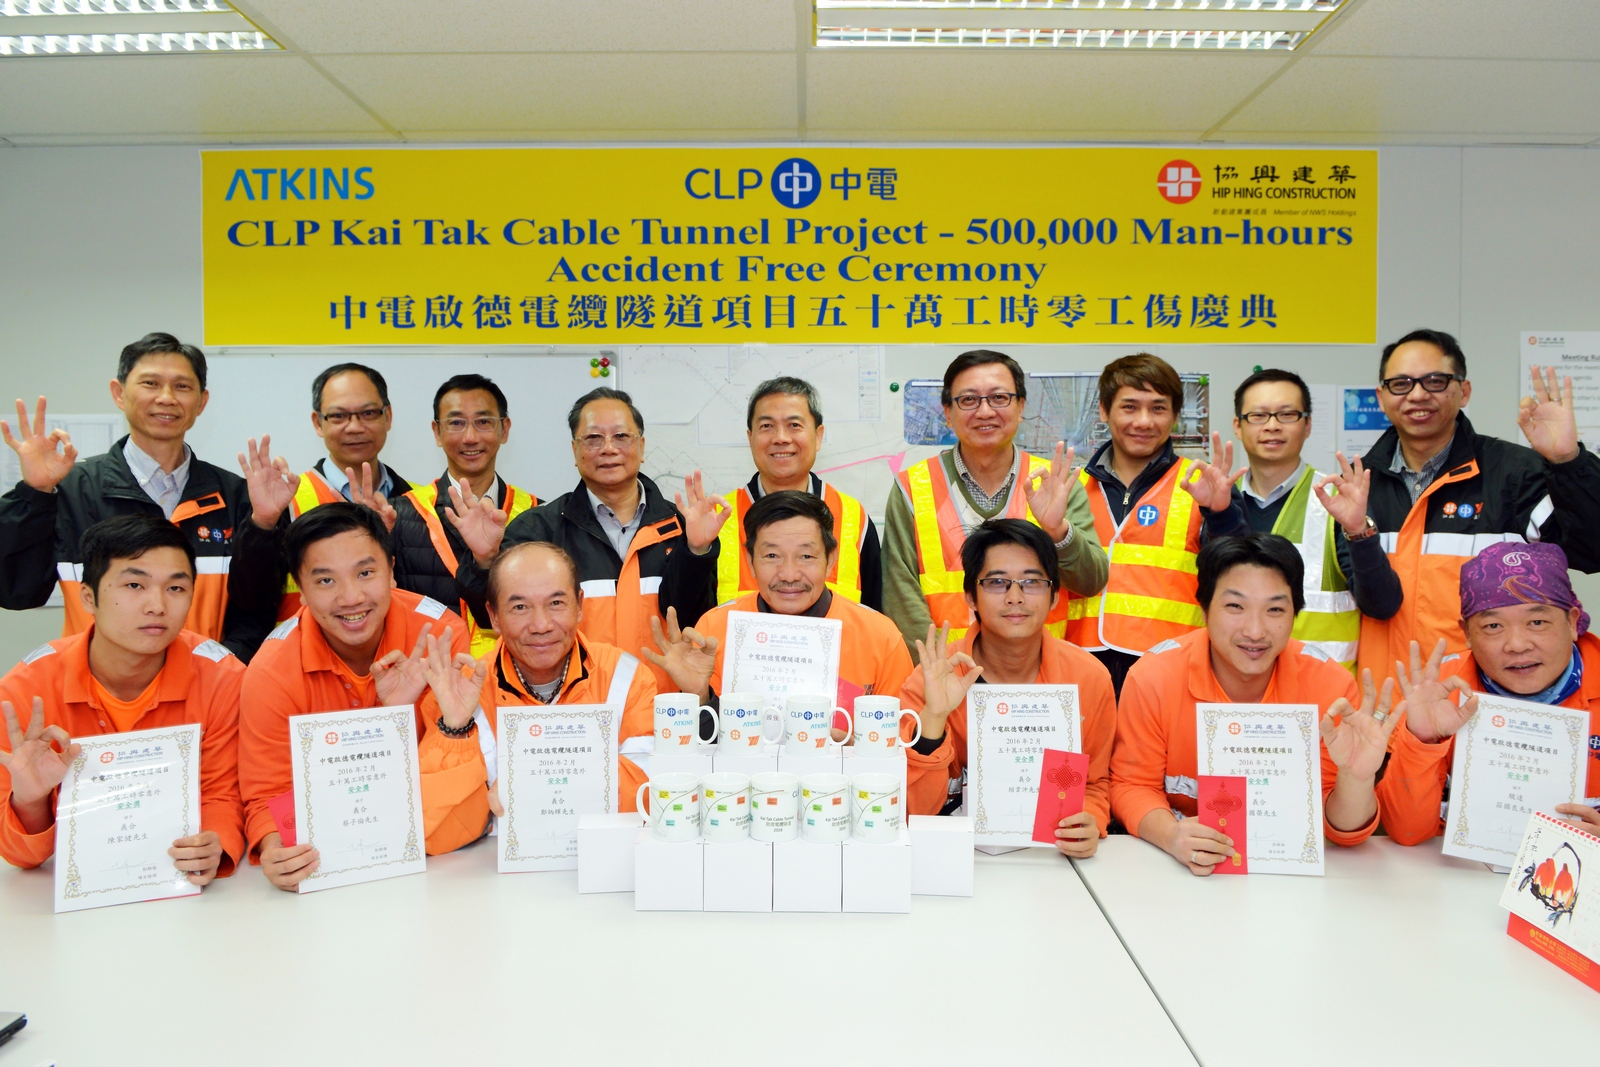 CLP Kai Tak Cable Tunnel Project Team